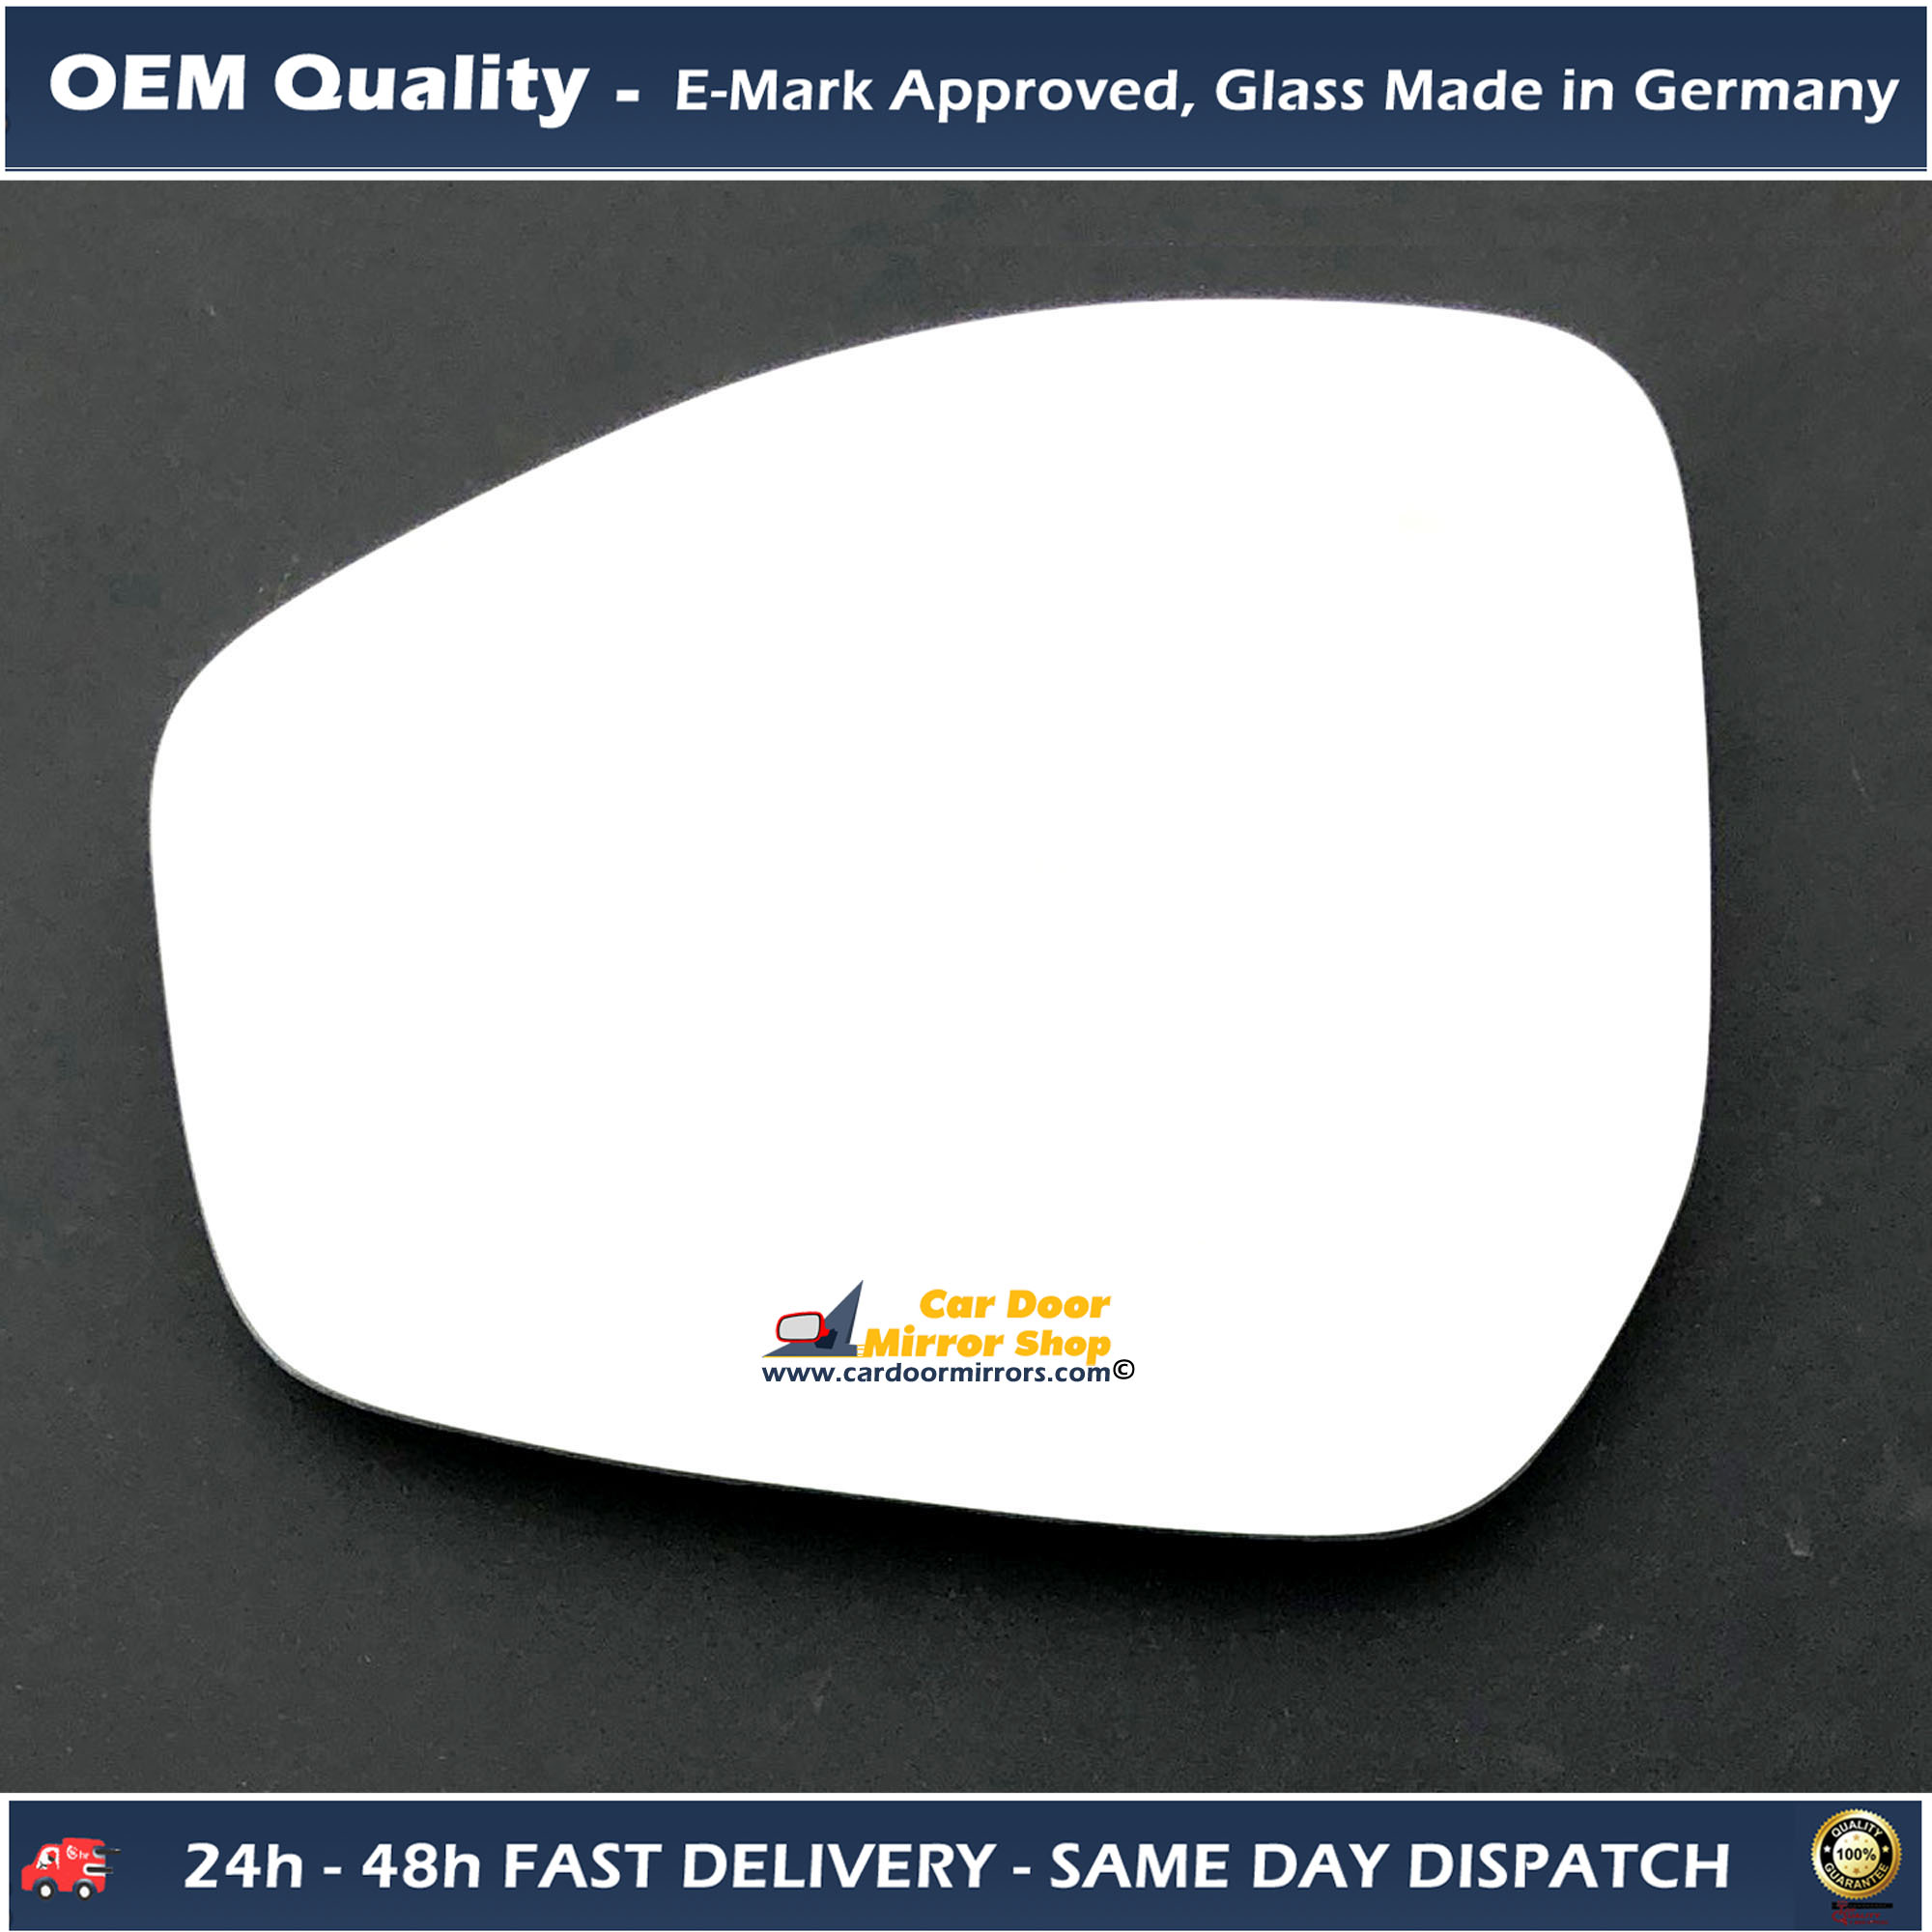 Land Rover VELAR Wing Mirror Glass LEFT HAND ( UK Passenger Side ) 2017 to 2020 – Convex Wing Mirror